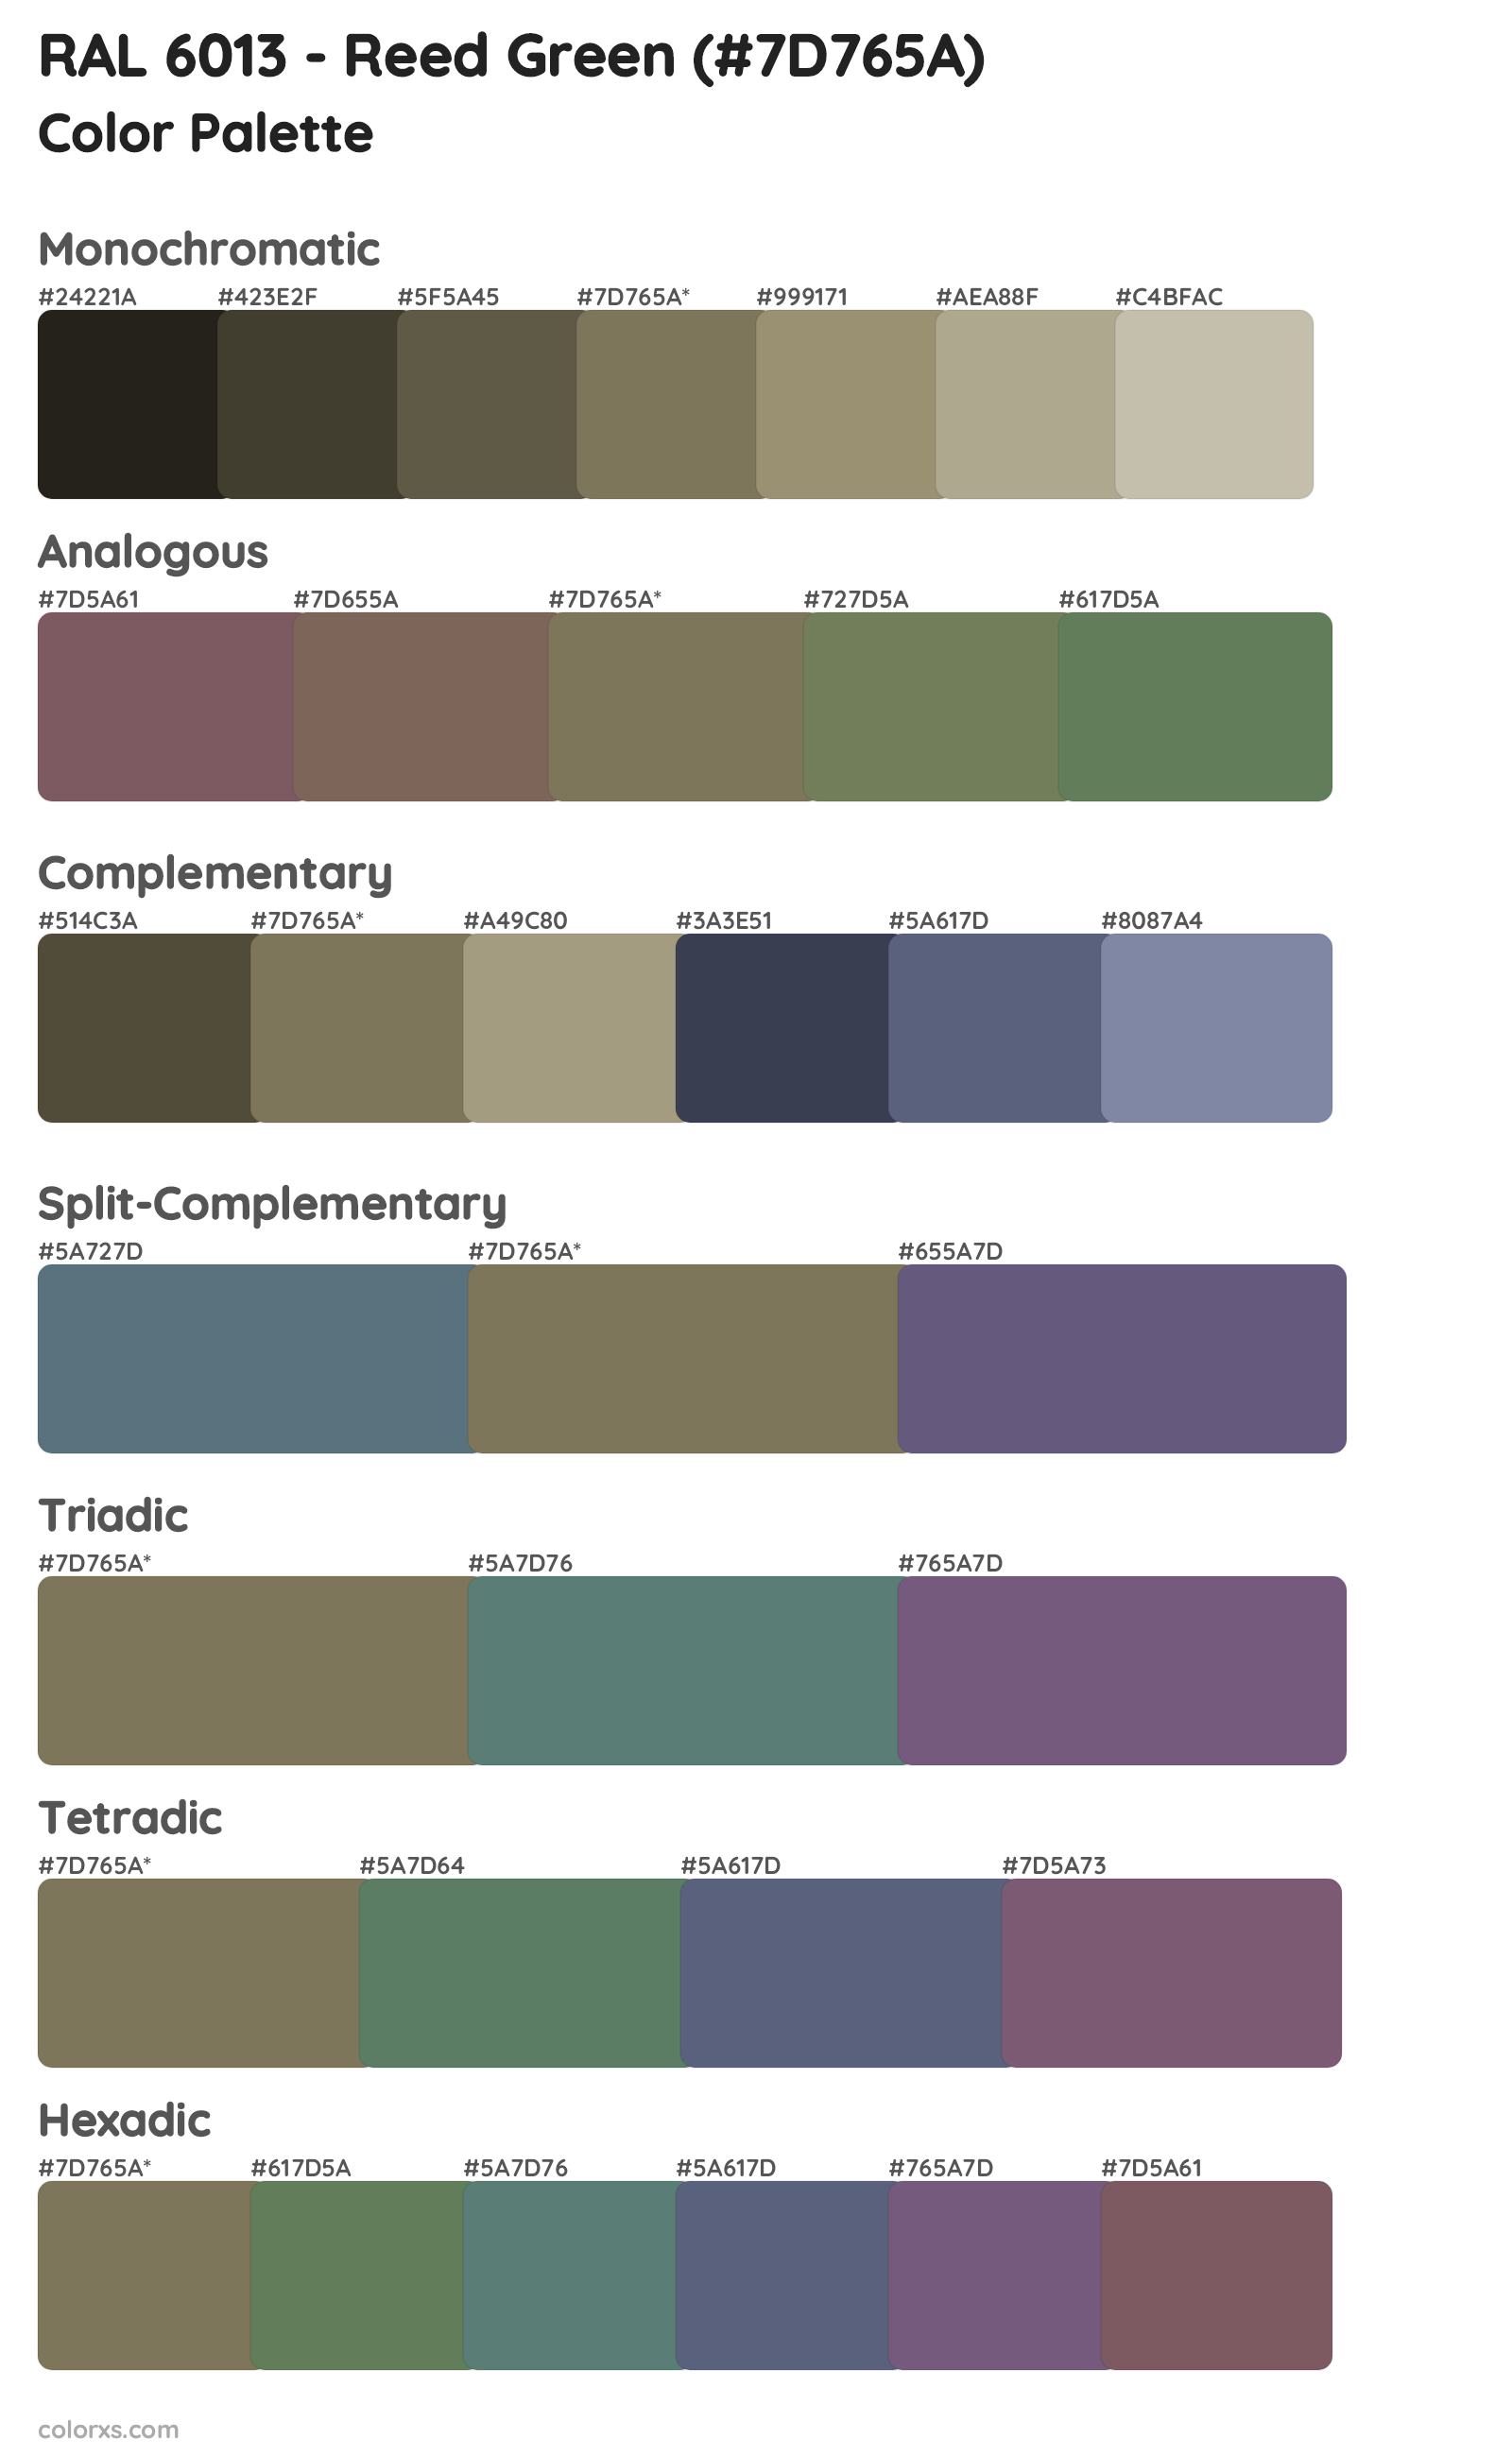 RAL 6013 - Reed Green Color Scheme Palettes